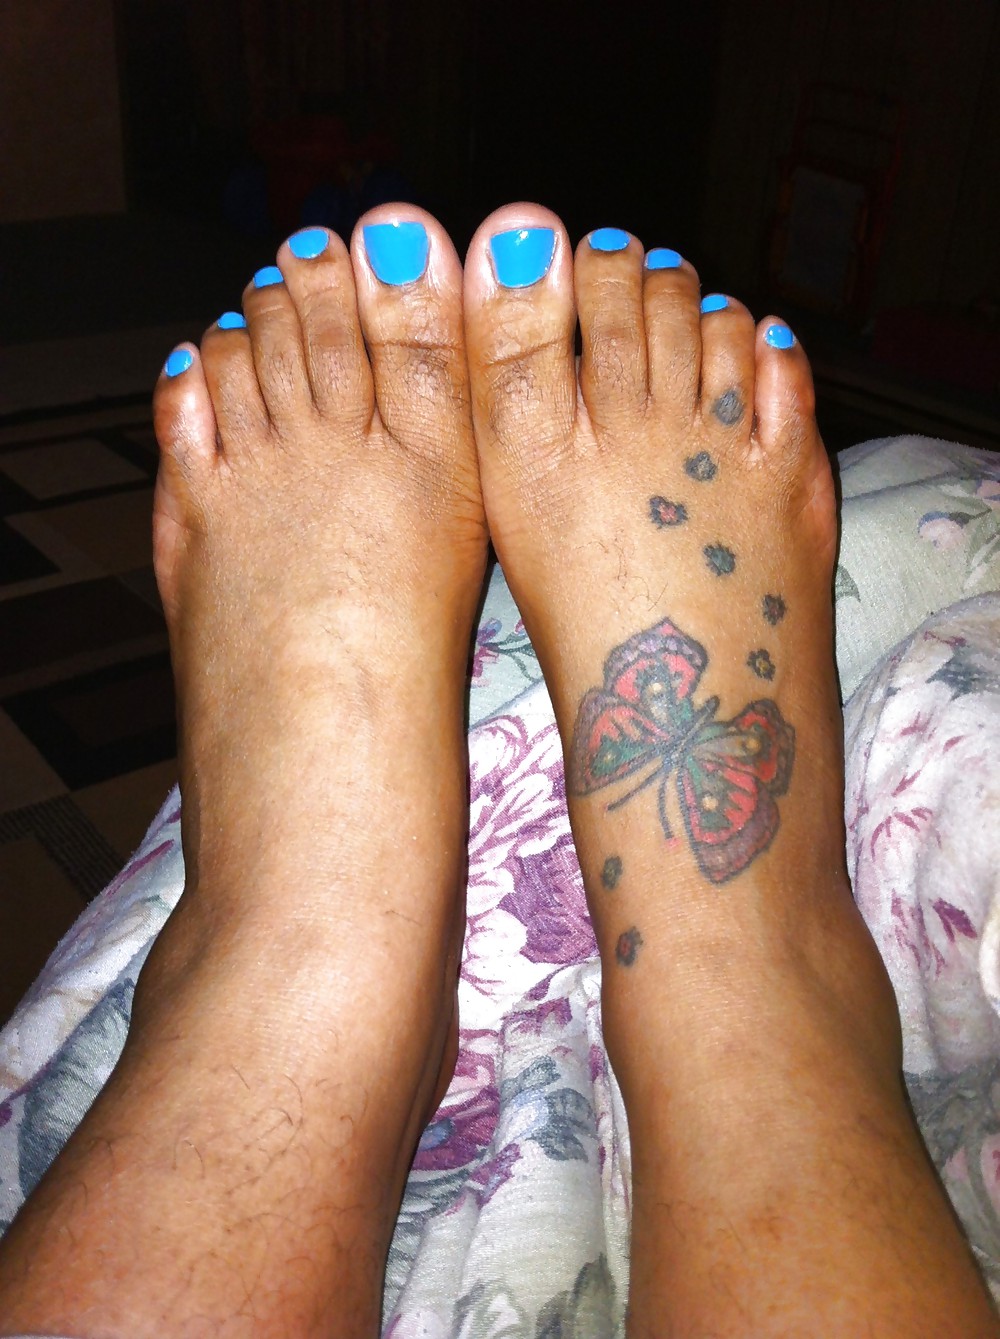 New Blue Painted Toes from a Freind